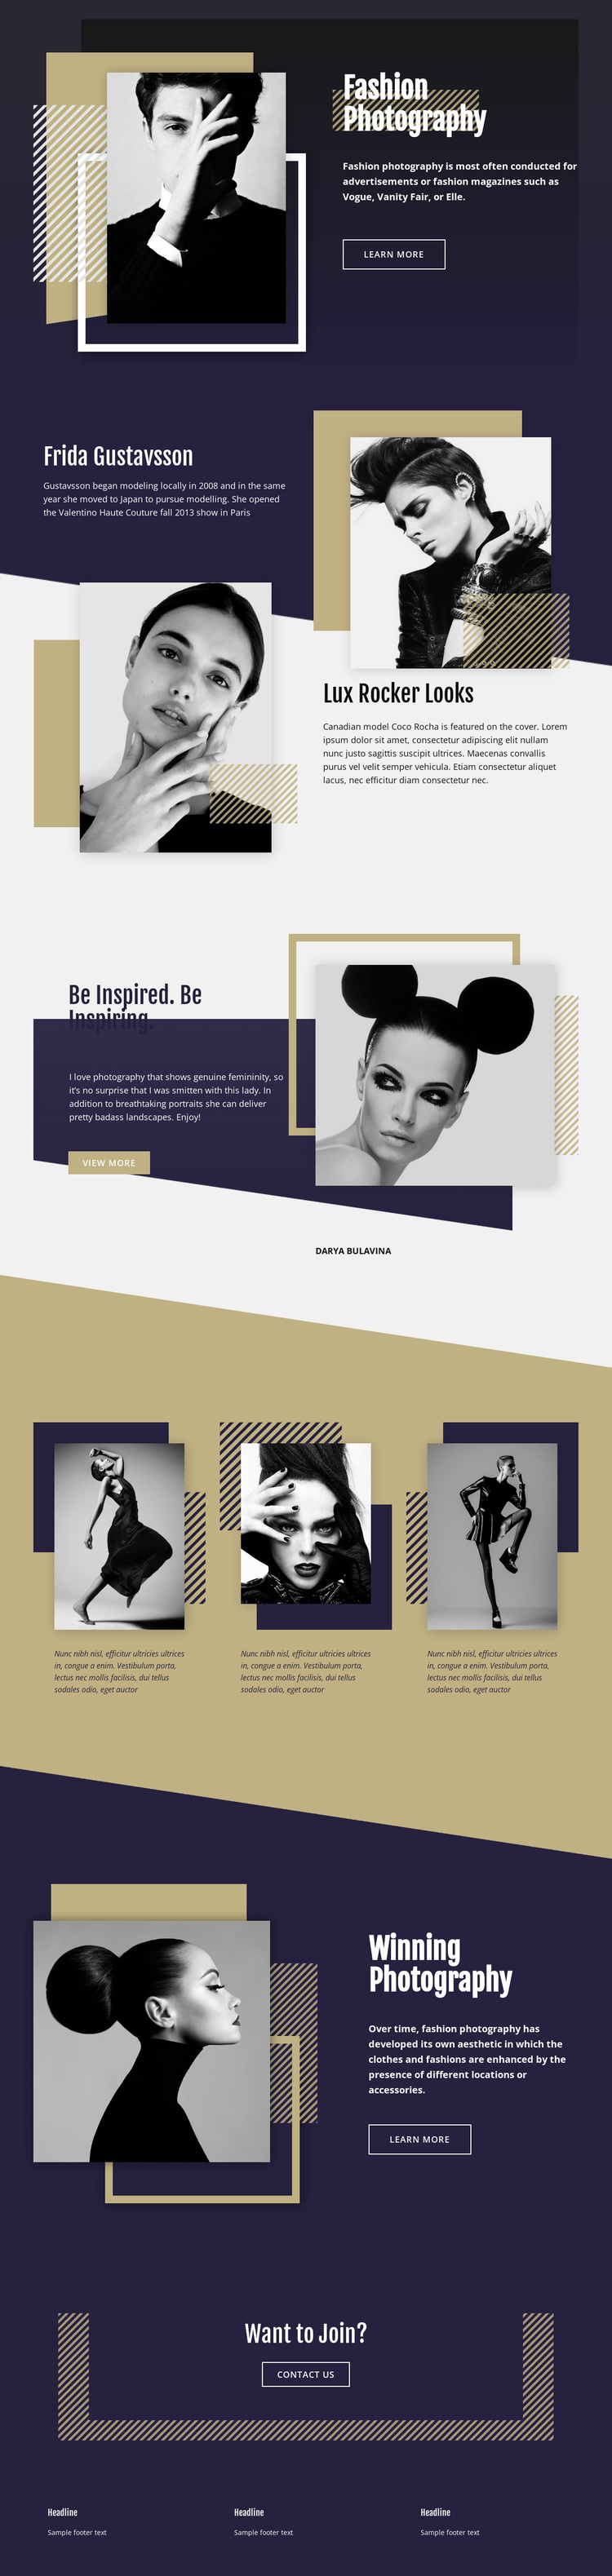 Fashion Photography Website Template